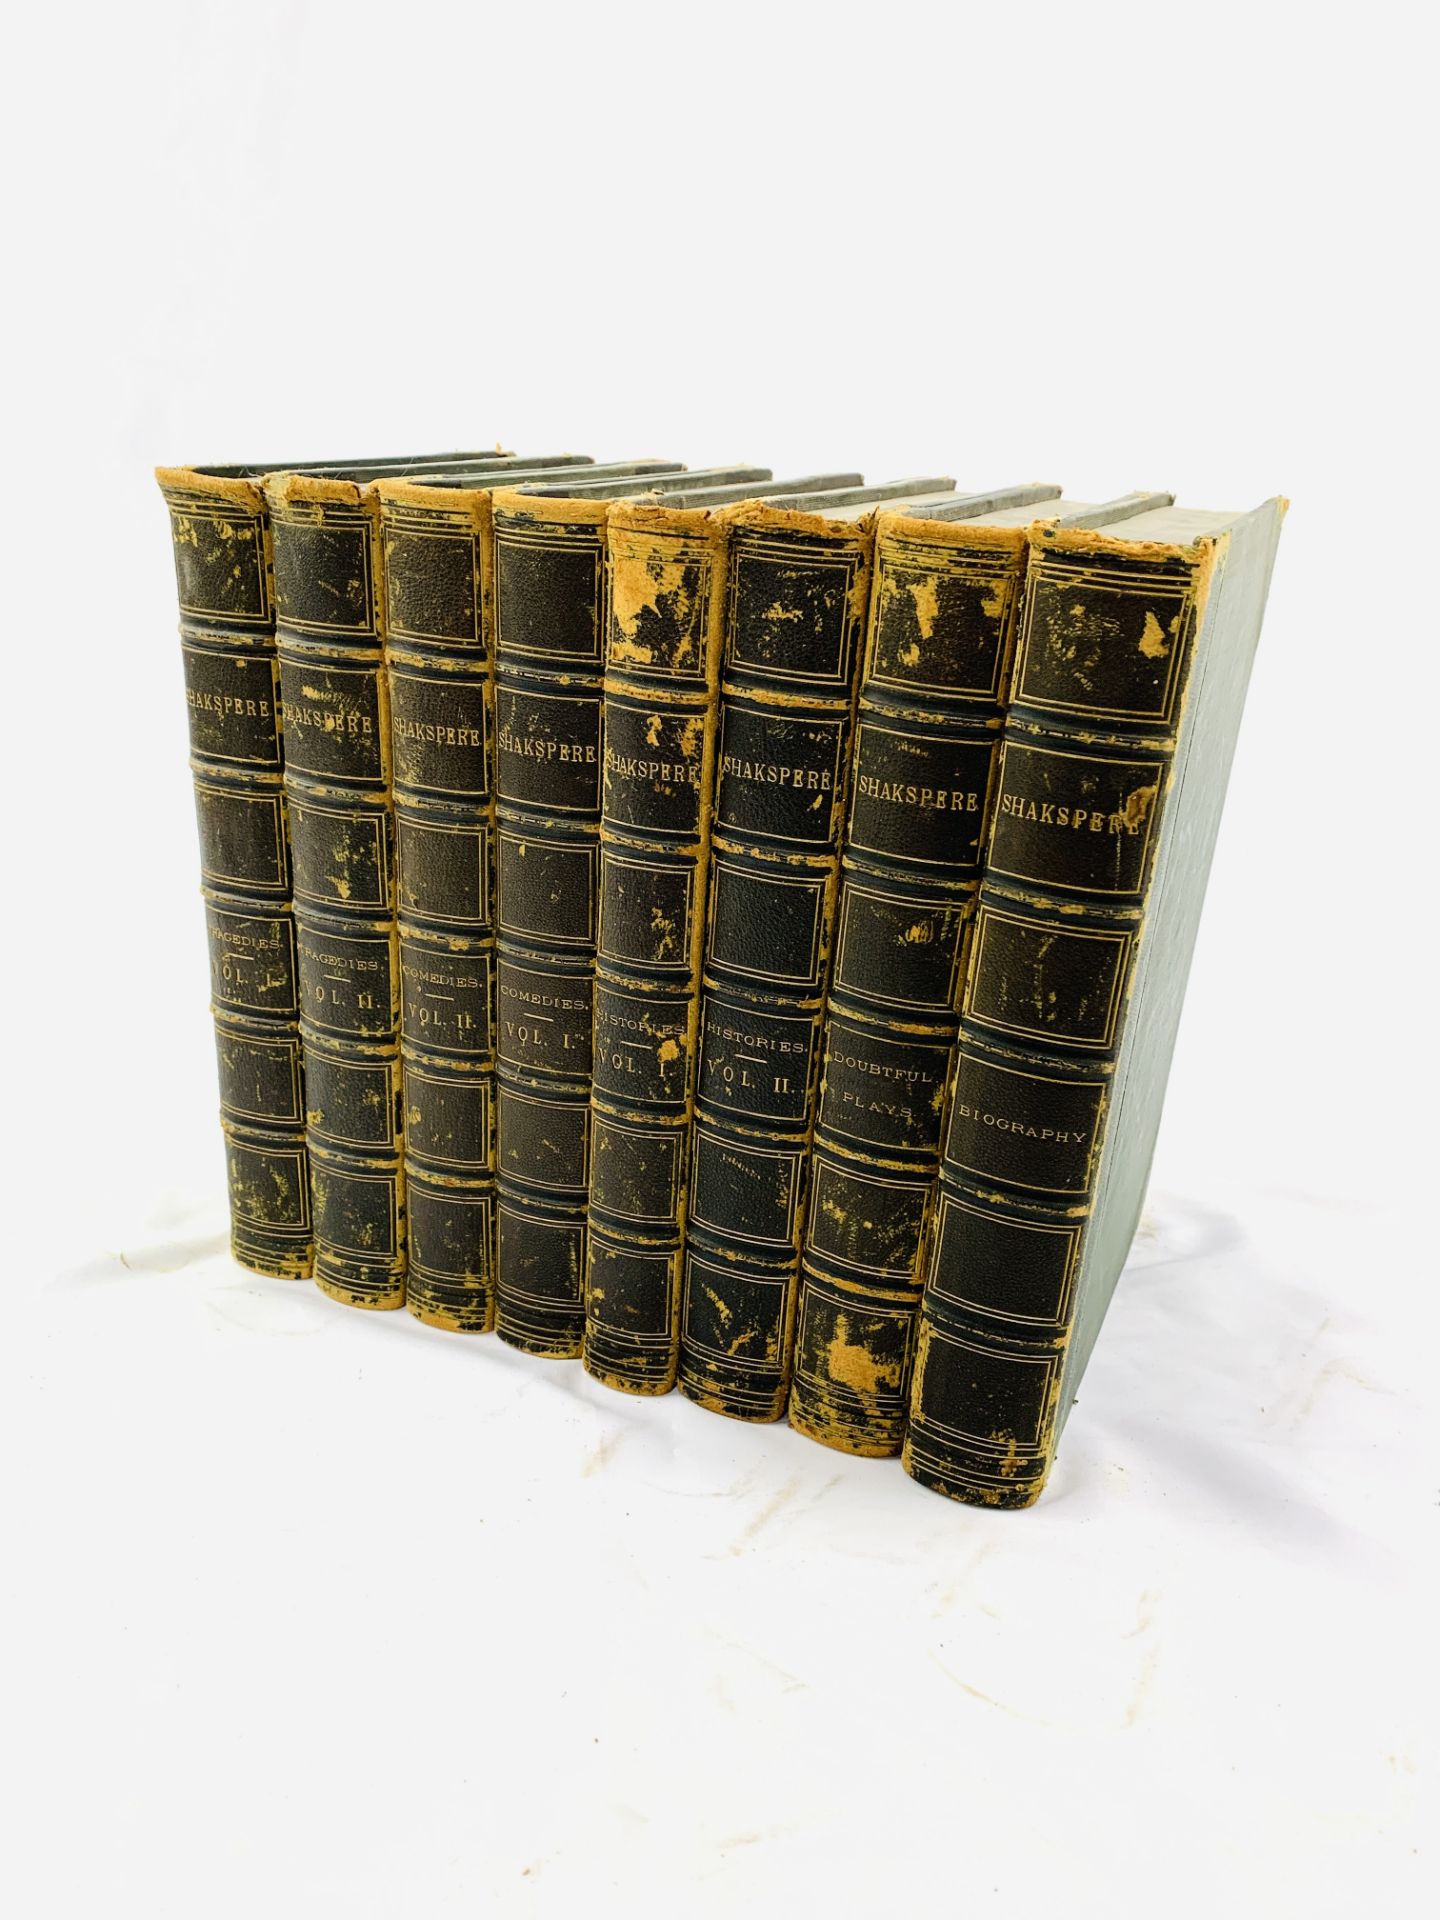 The Pictorial Edition of The Works of Shakespeare, edited by Charles Knight, 8 volumes, 1867